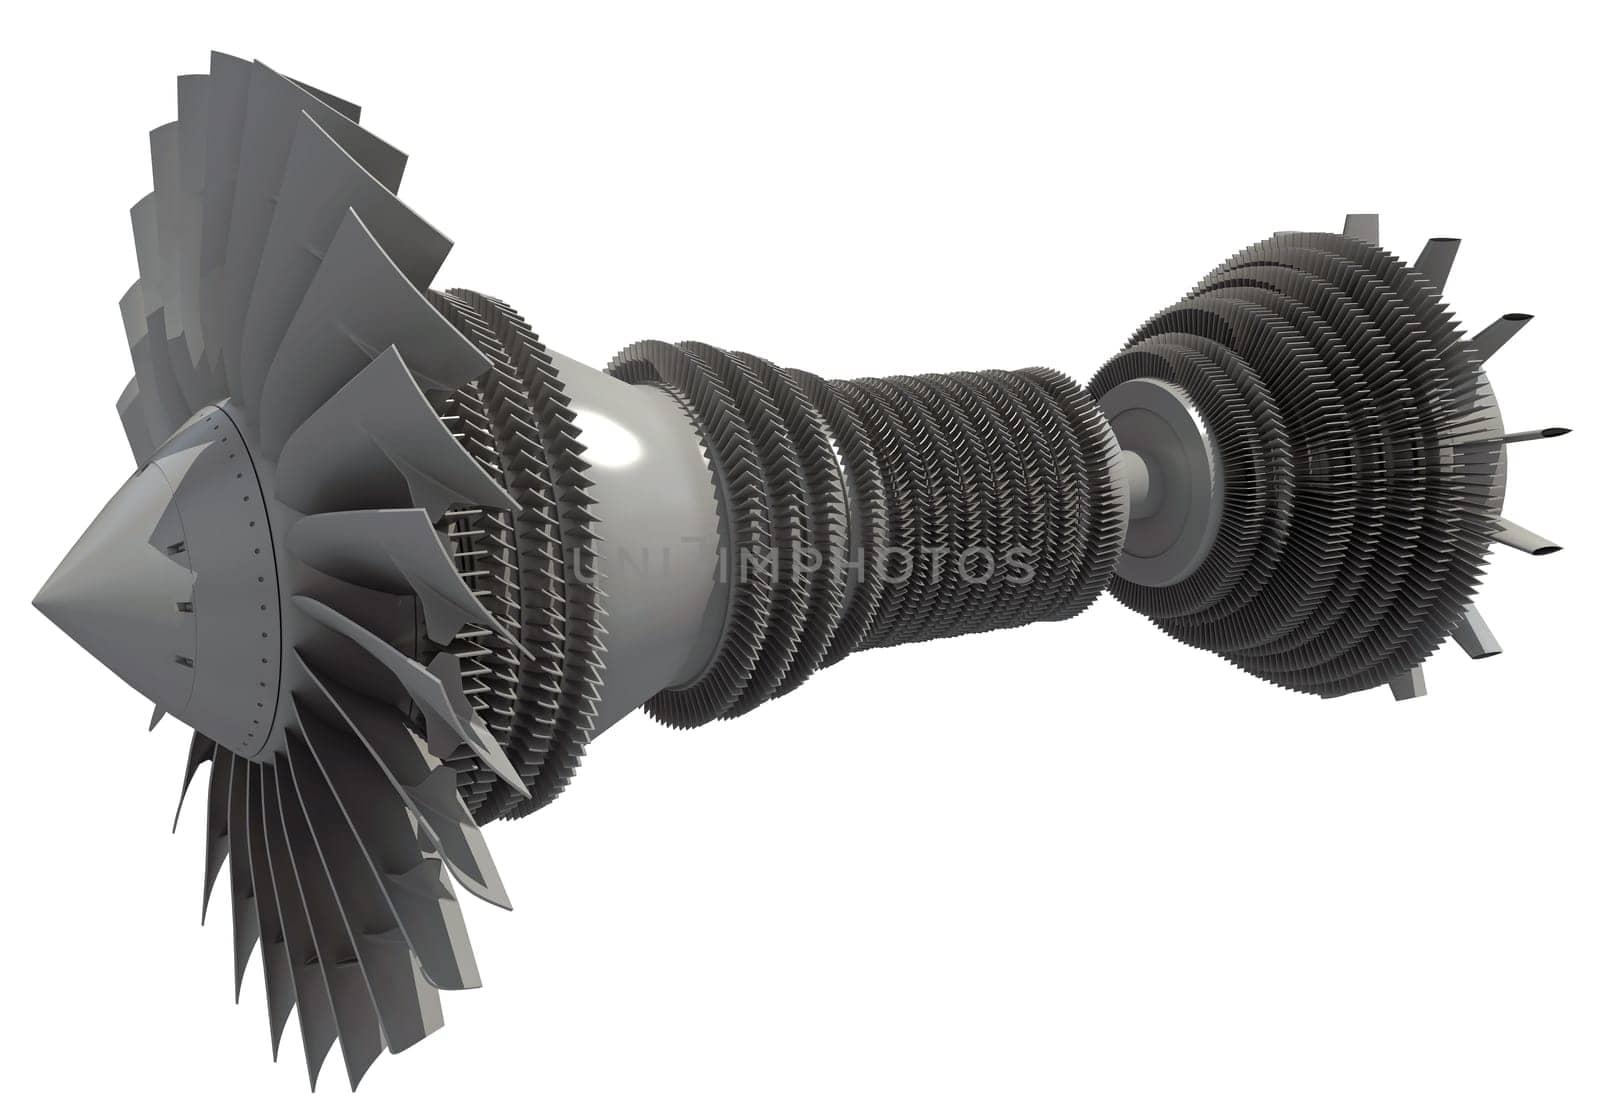 Aircraft Turbine Engine 3D rendering on white background by 3DHorse